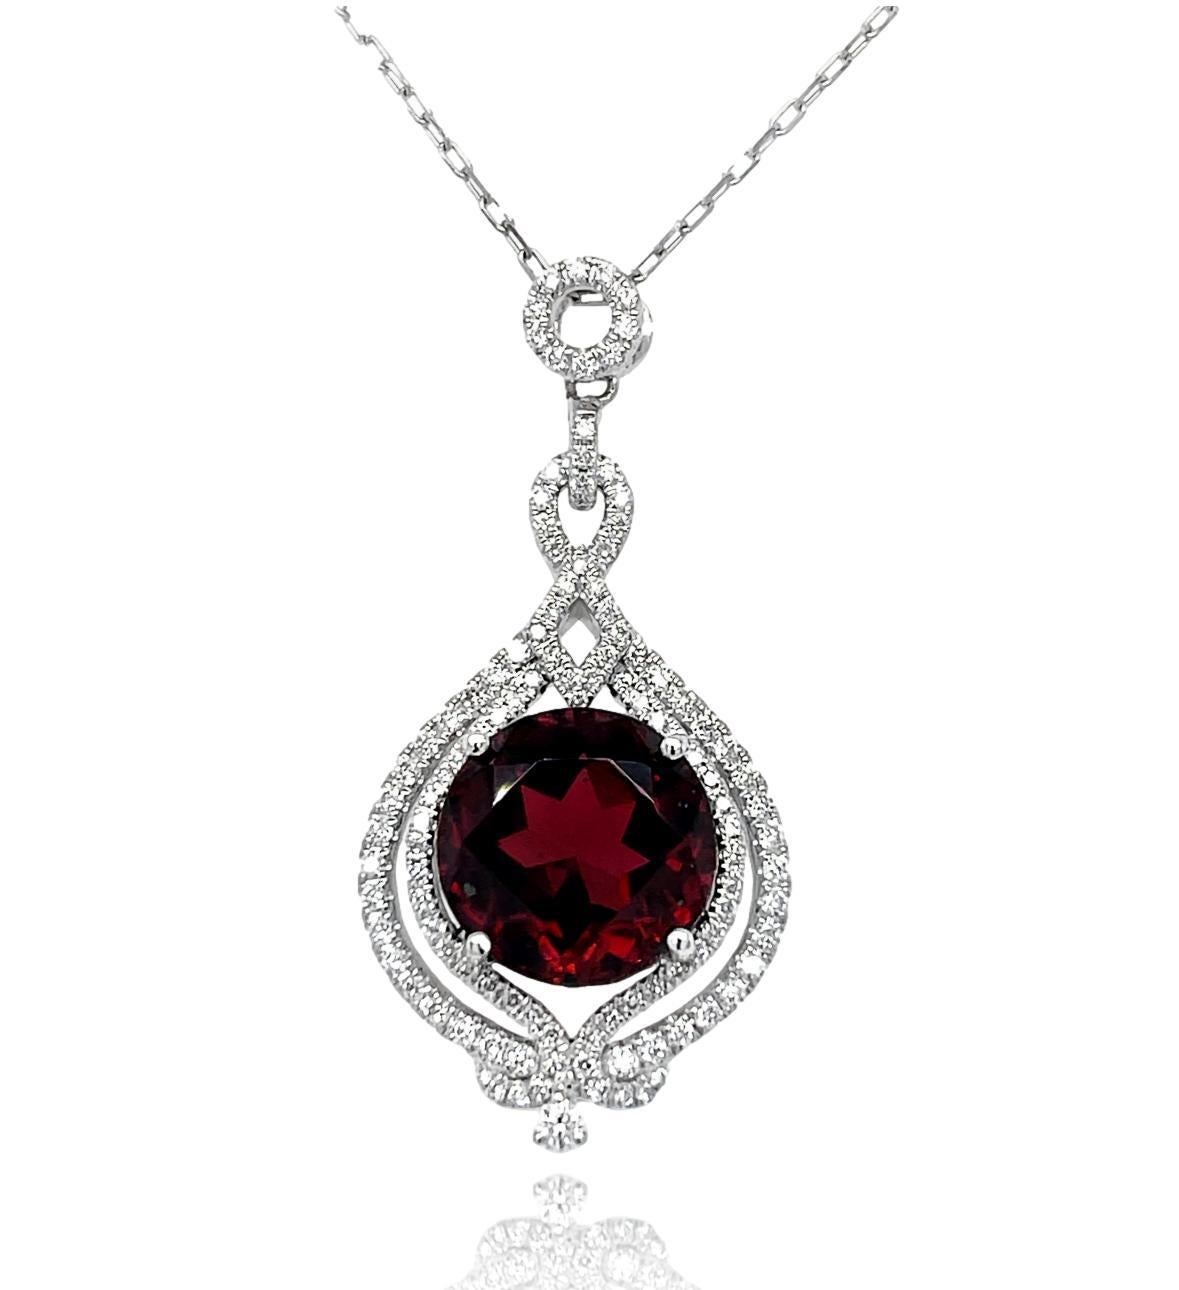 This stunning pendant has a deep red 12mm round Garnet set in 18 karat white gold with 4 prong setting. There is a halo of 116 brilliant cut round sparkling diamonds surrounding the Garnet for a delicate accent. This pendant will be shipped in a